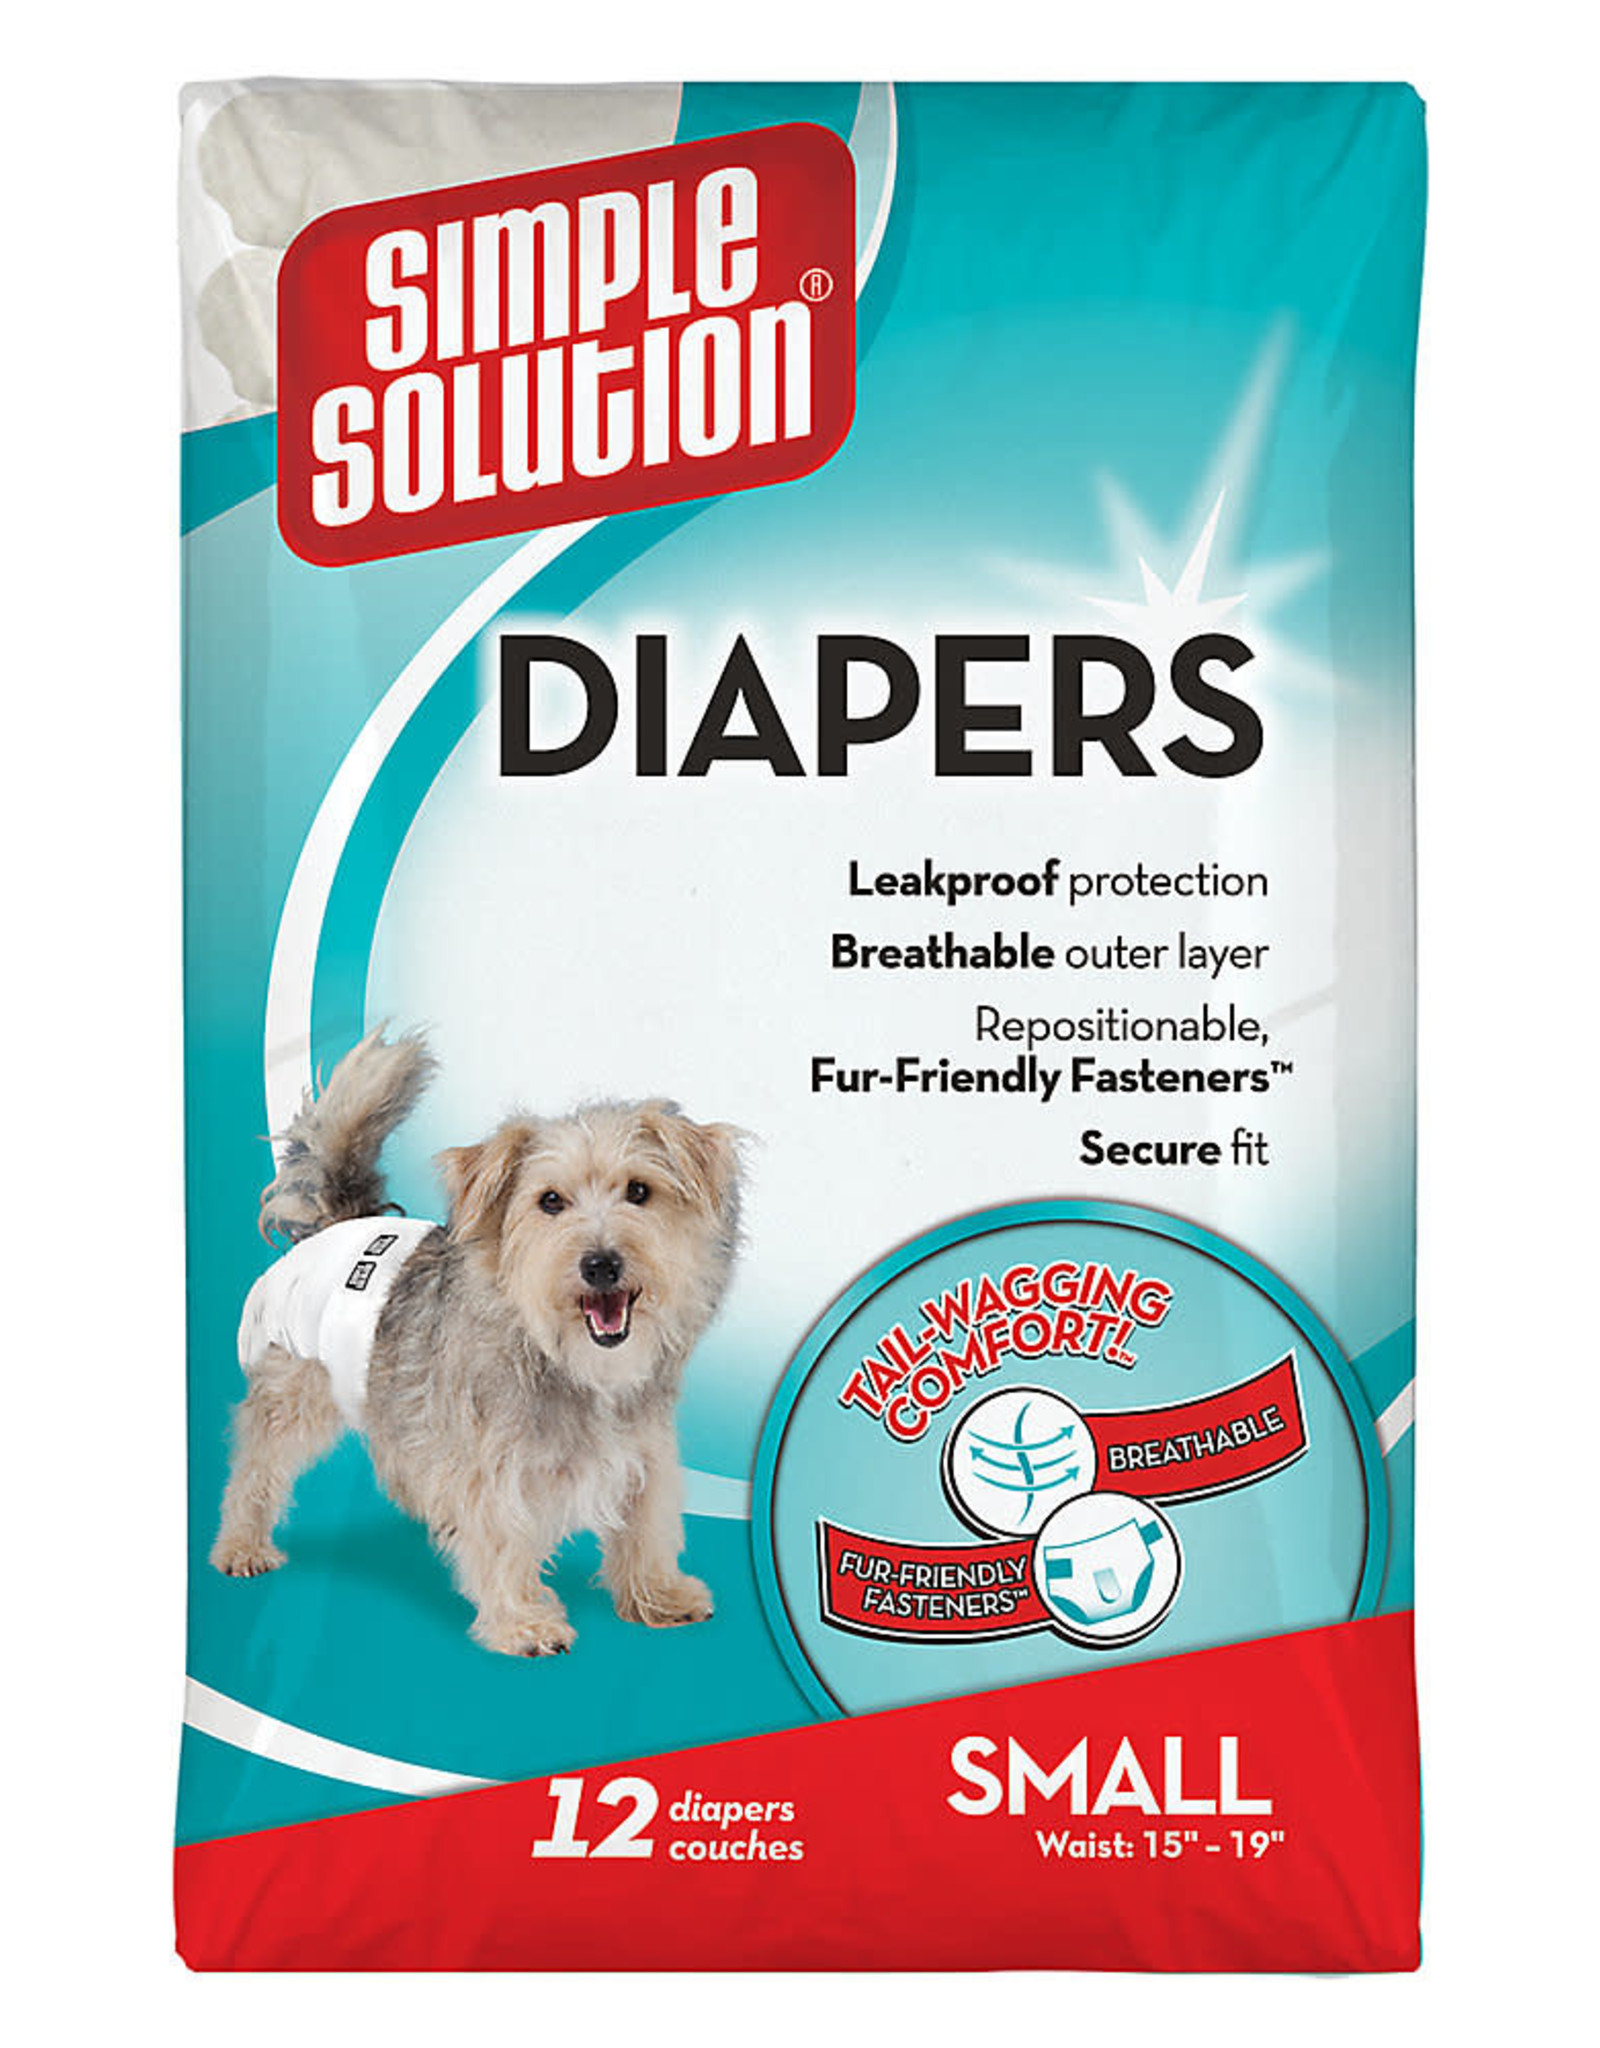 Simple Solution 12 Disposable Diapers, Small